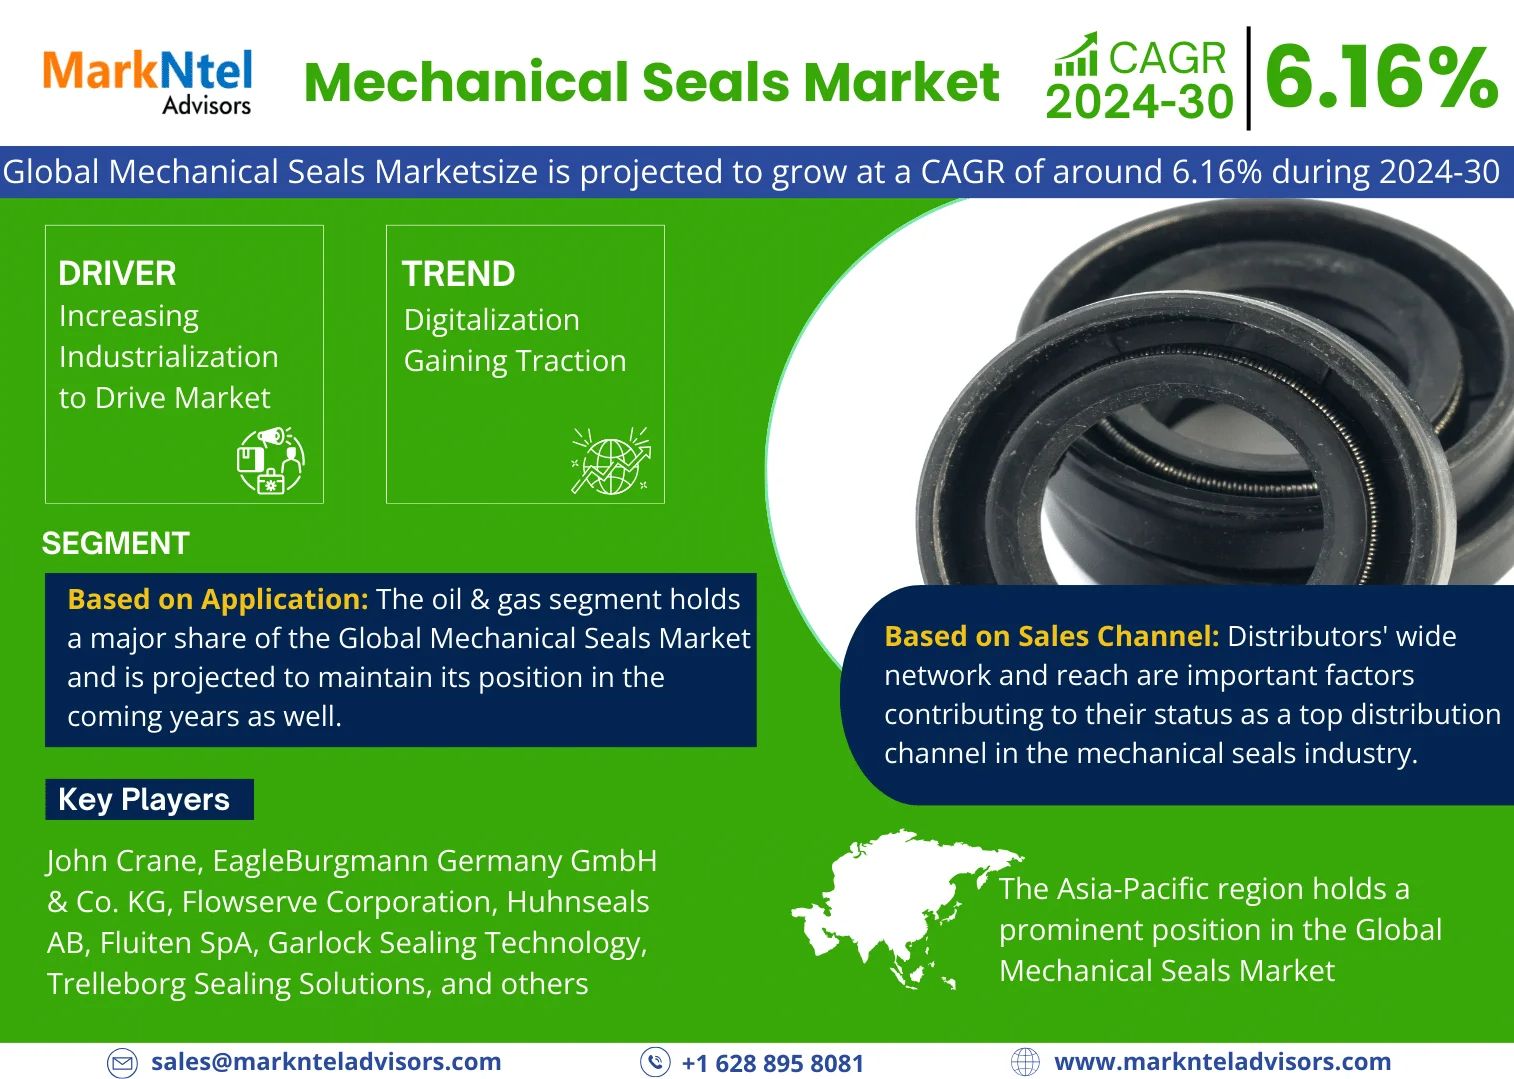 A Comprehensive Guide to the Mechanical Seals Market: Definition, Trends, and Opportunities 2024-2030